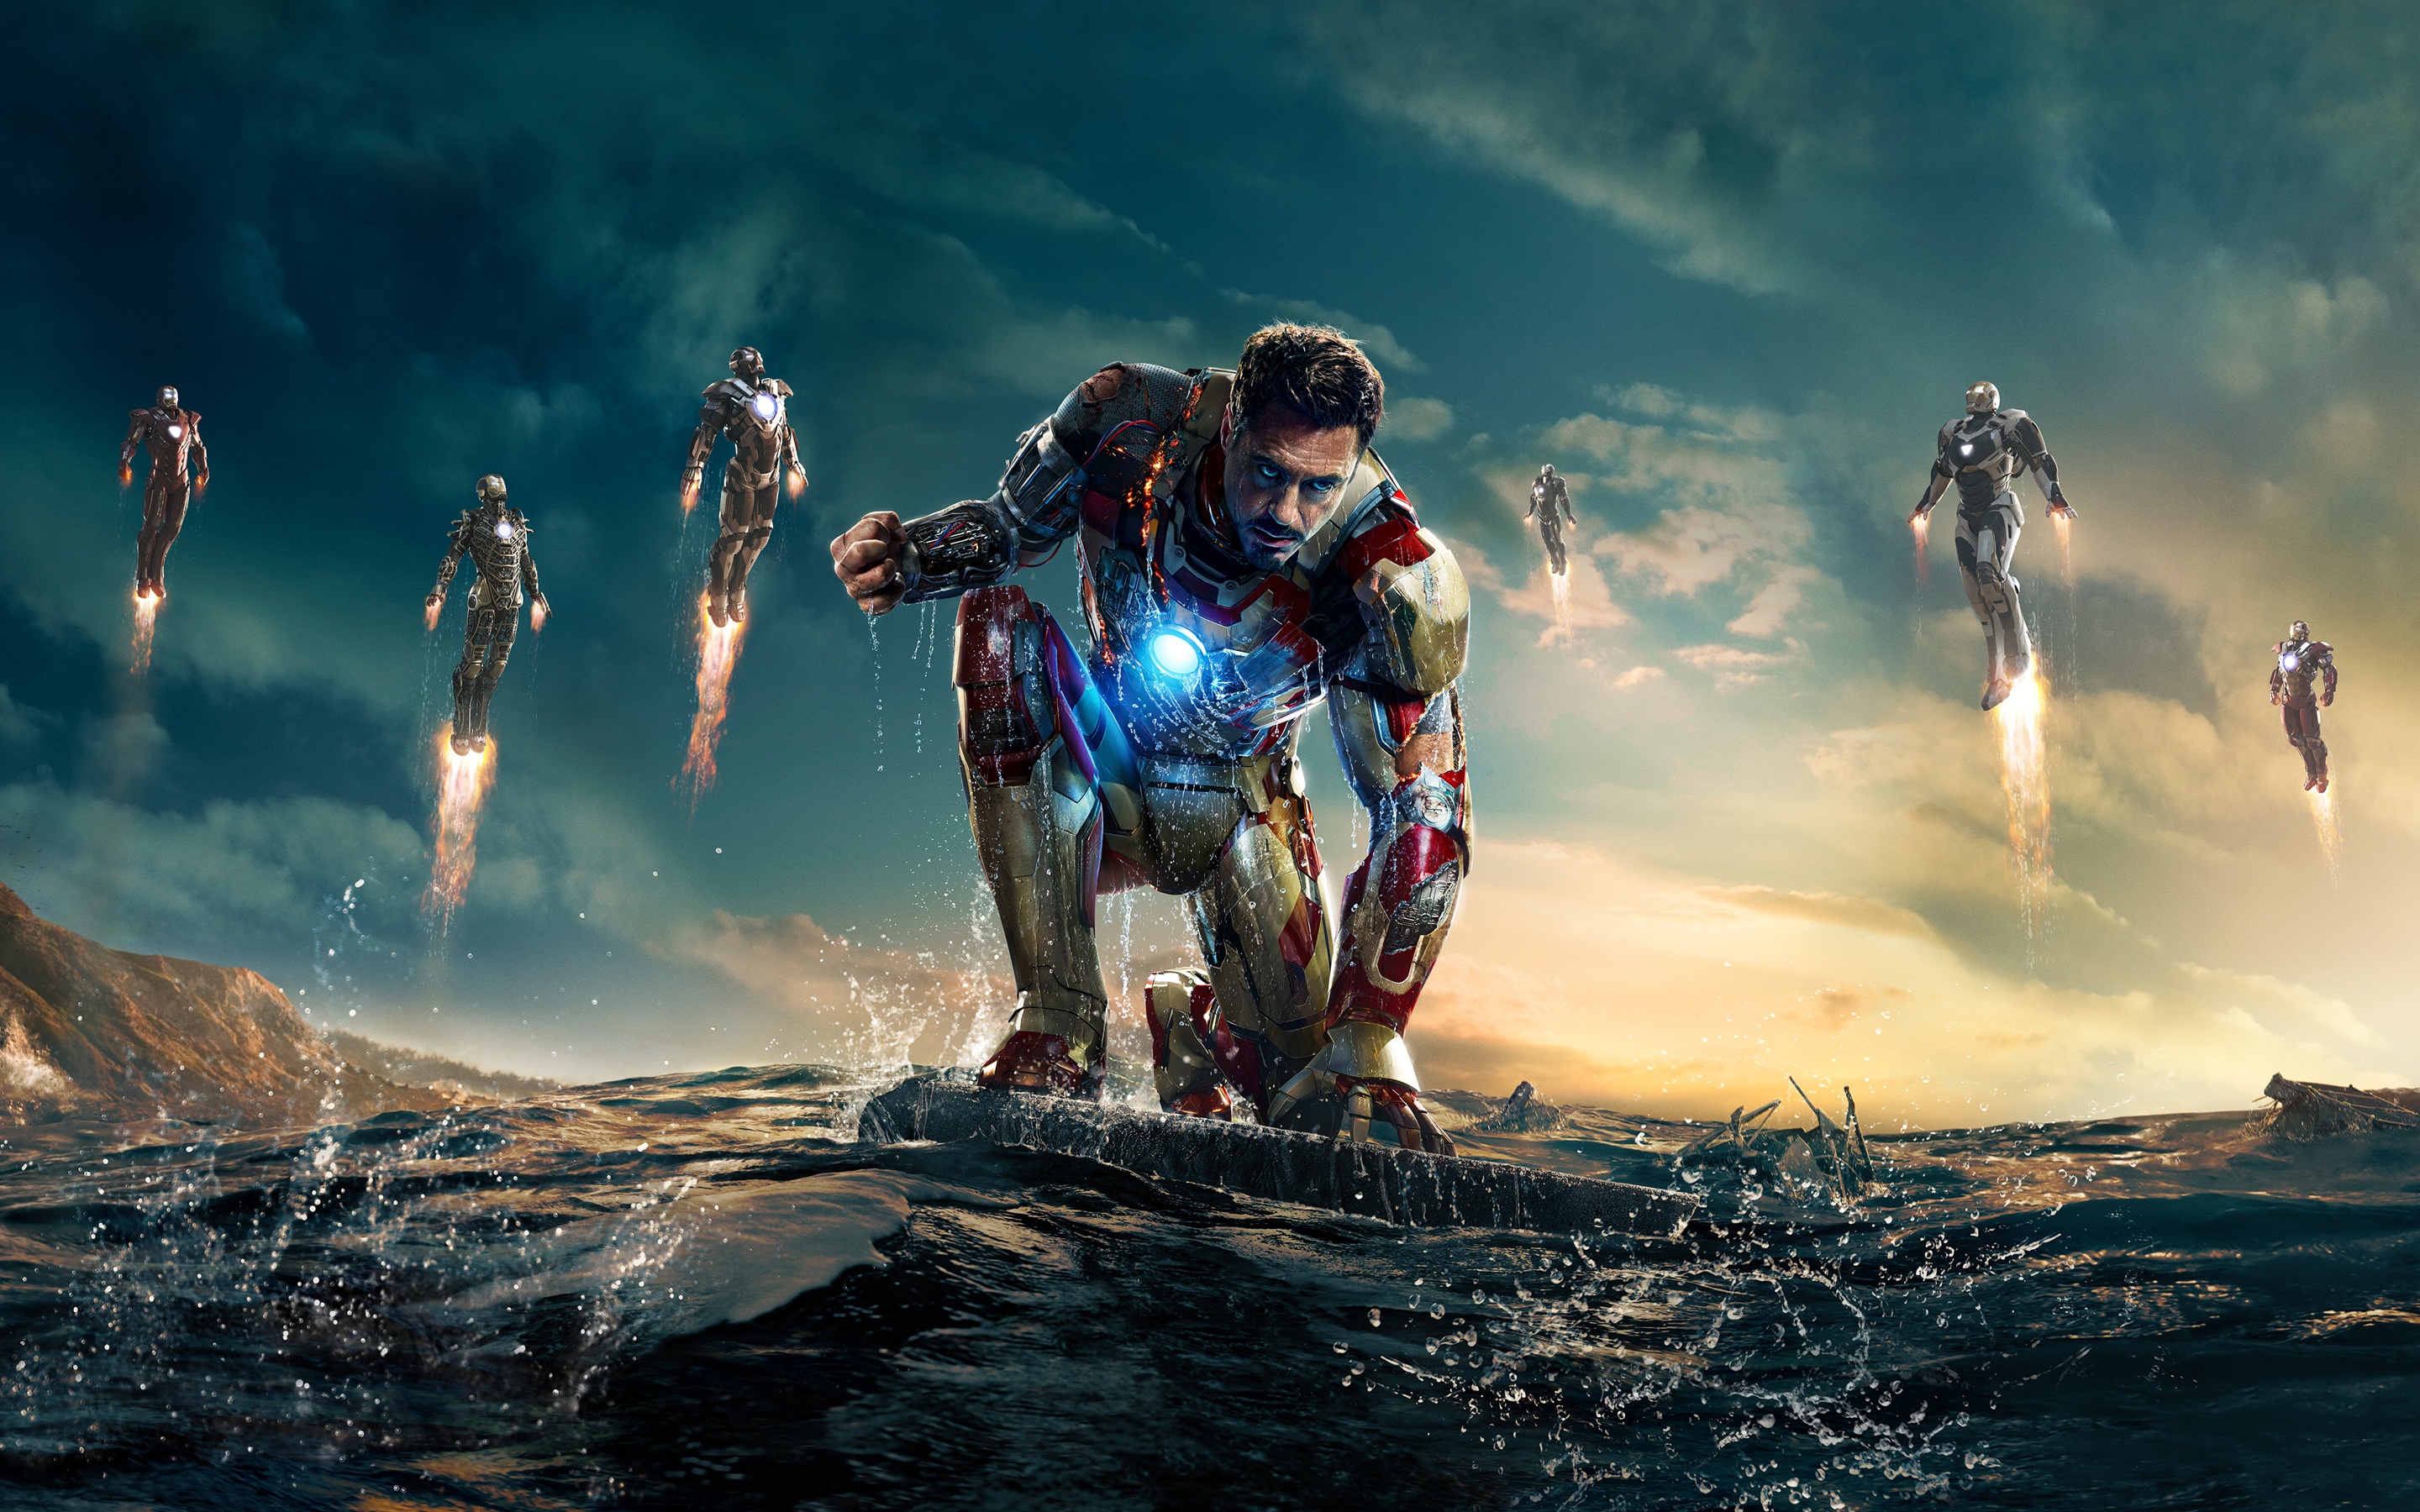 Iron Man 3 Blu-ray SteelBook from Zavvi Is Live for Pre-order